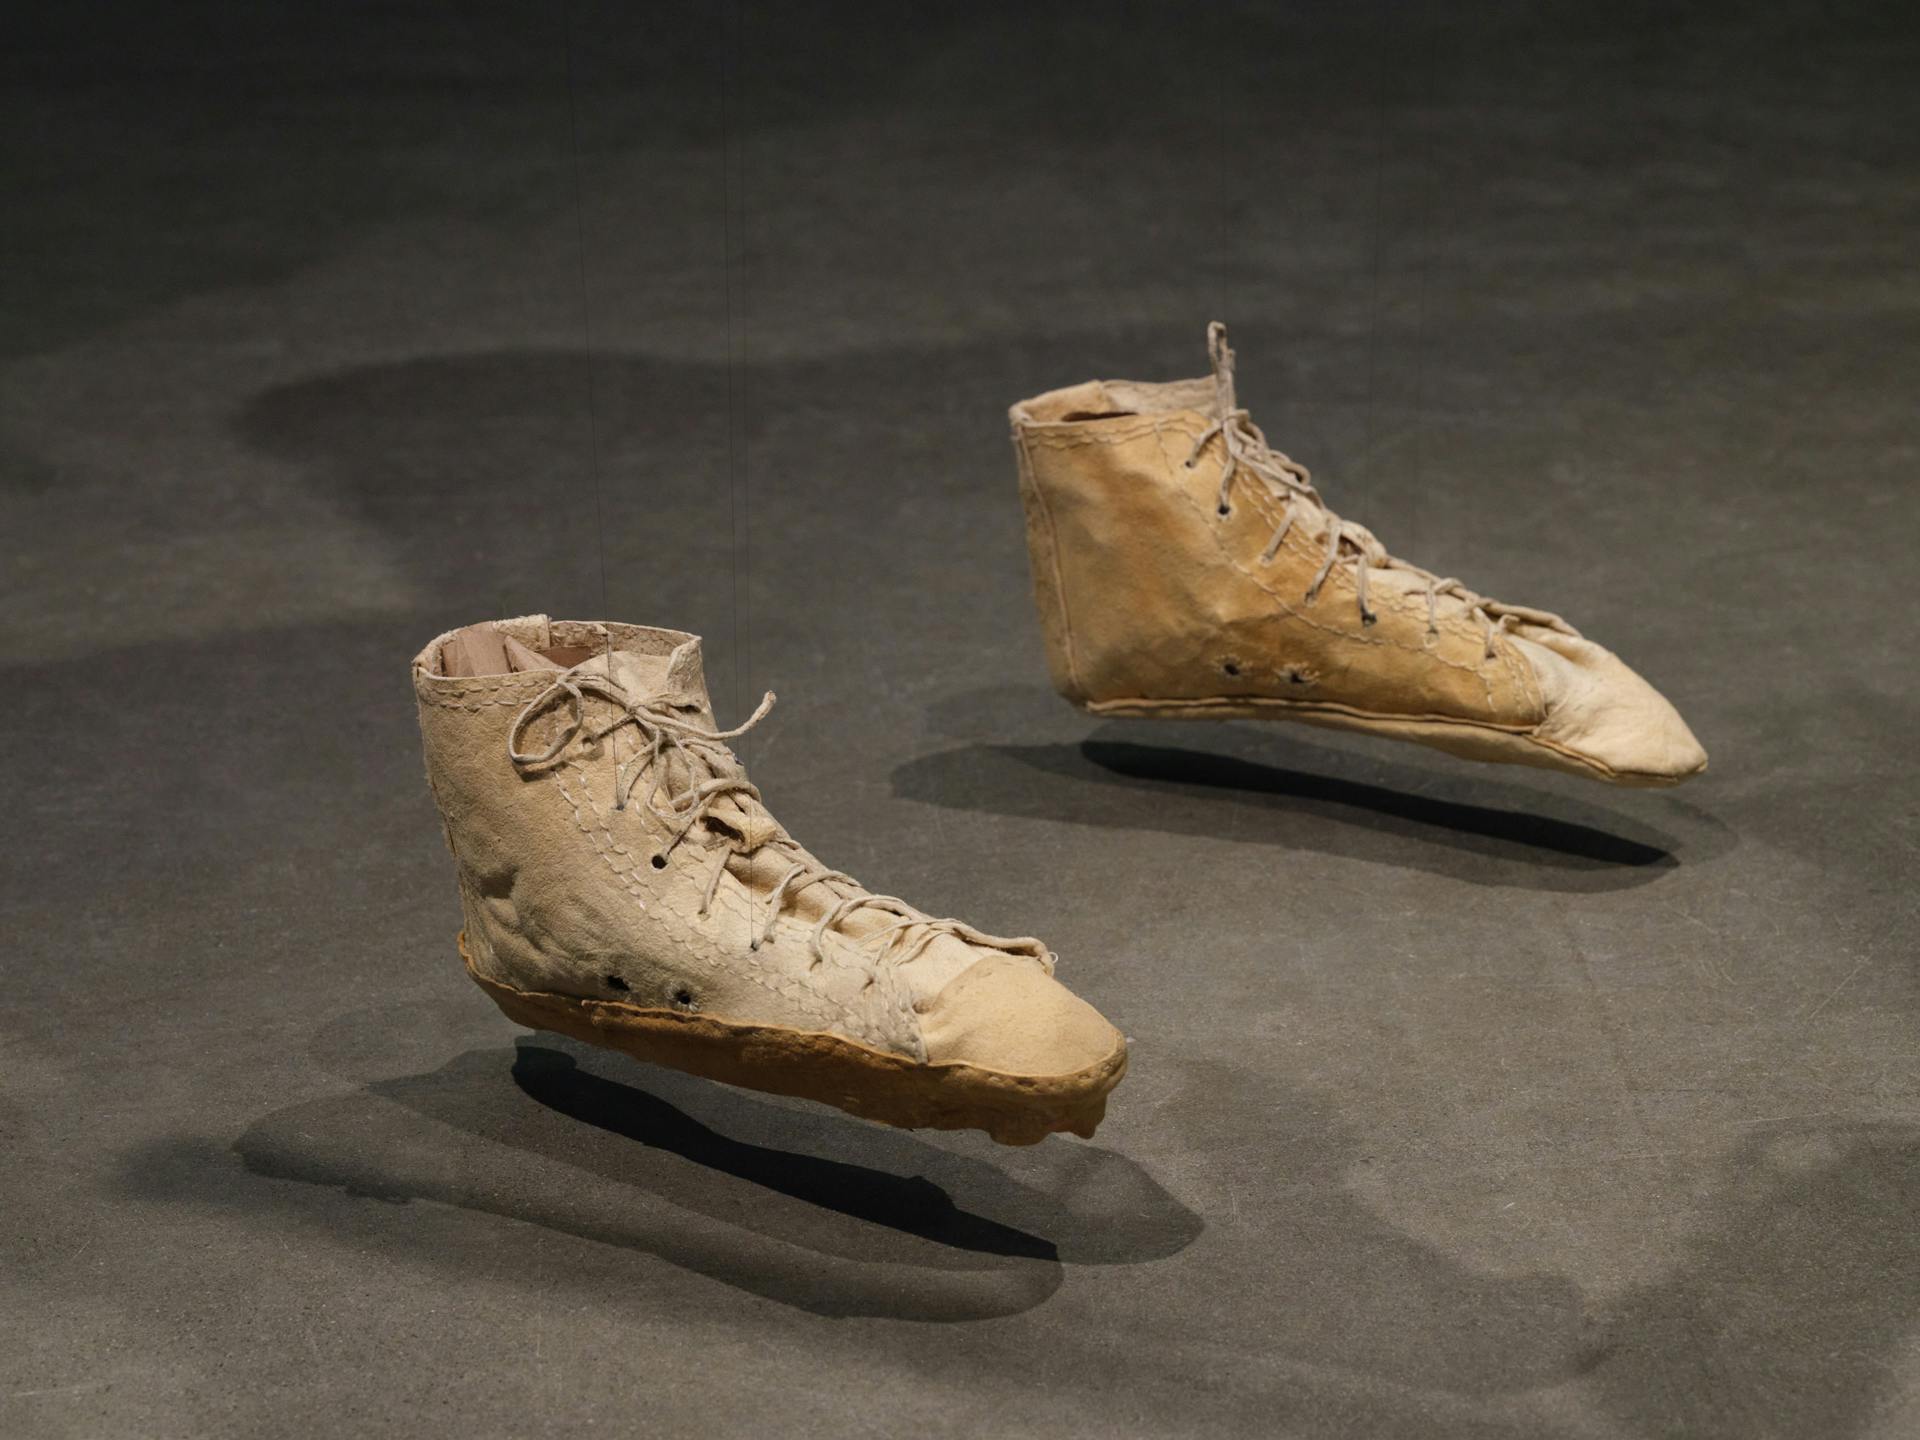 a pair of converse all-star-style sneakers made from tanned hide, suspended several inches above a concrete floor. the sneakers' soles resemble moccasins.